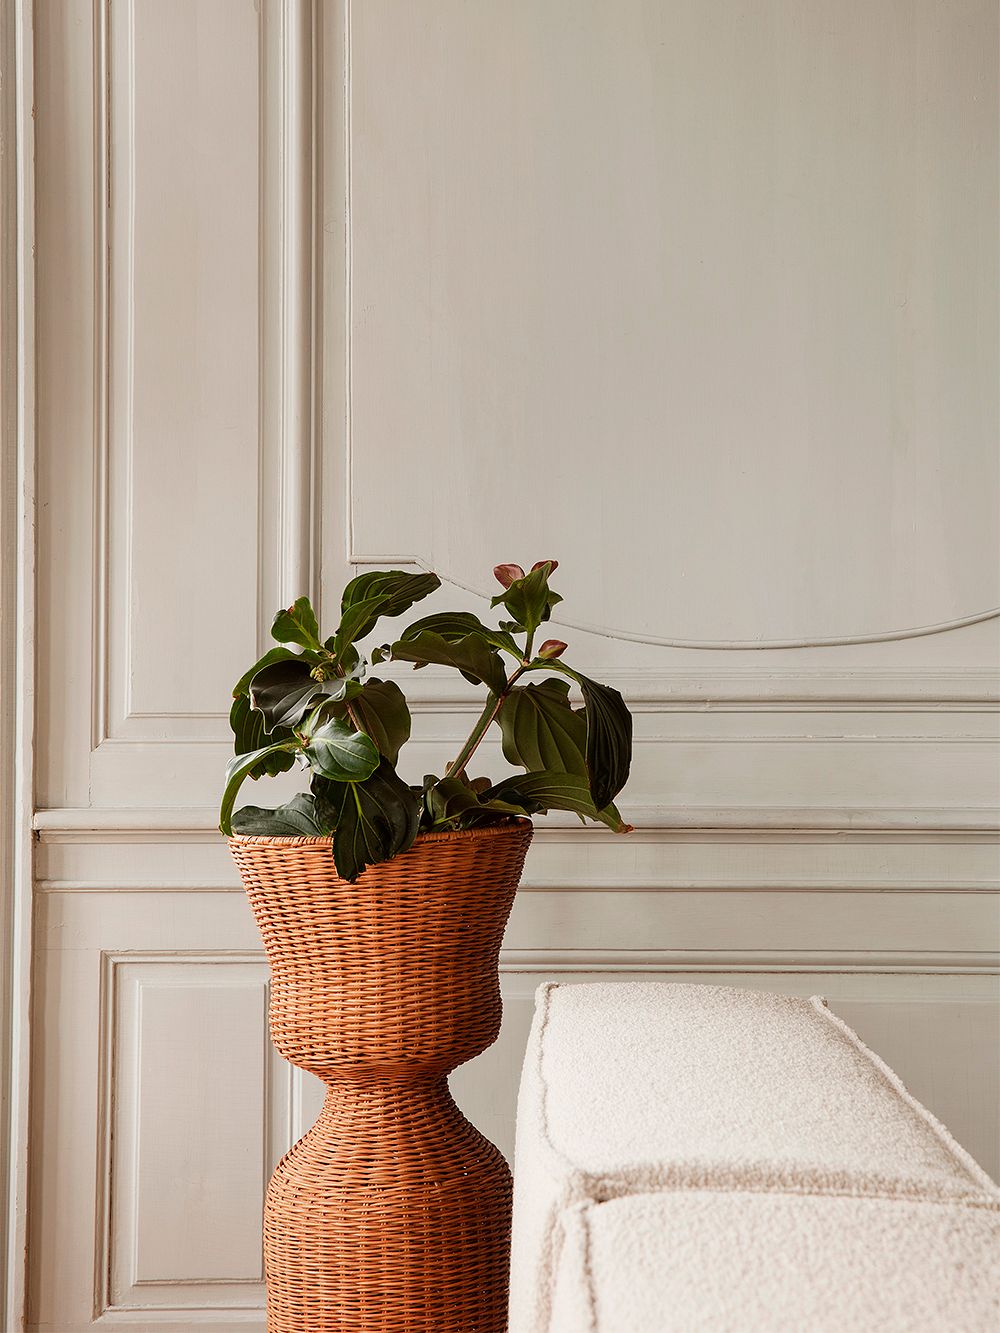 An image of ferm LIVING's Agnes plant stand as part of the living room decor.